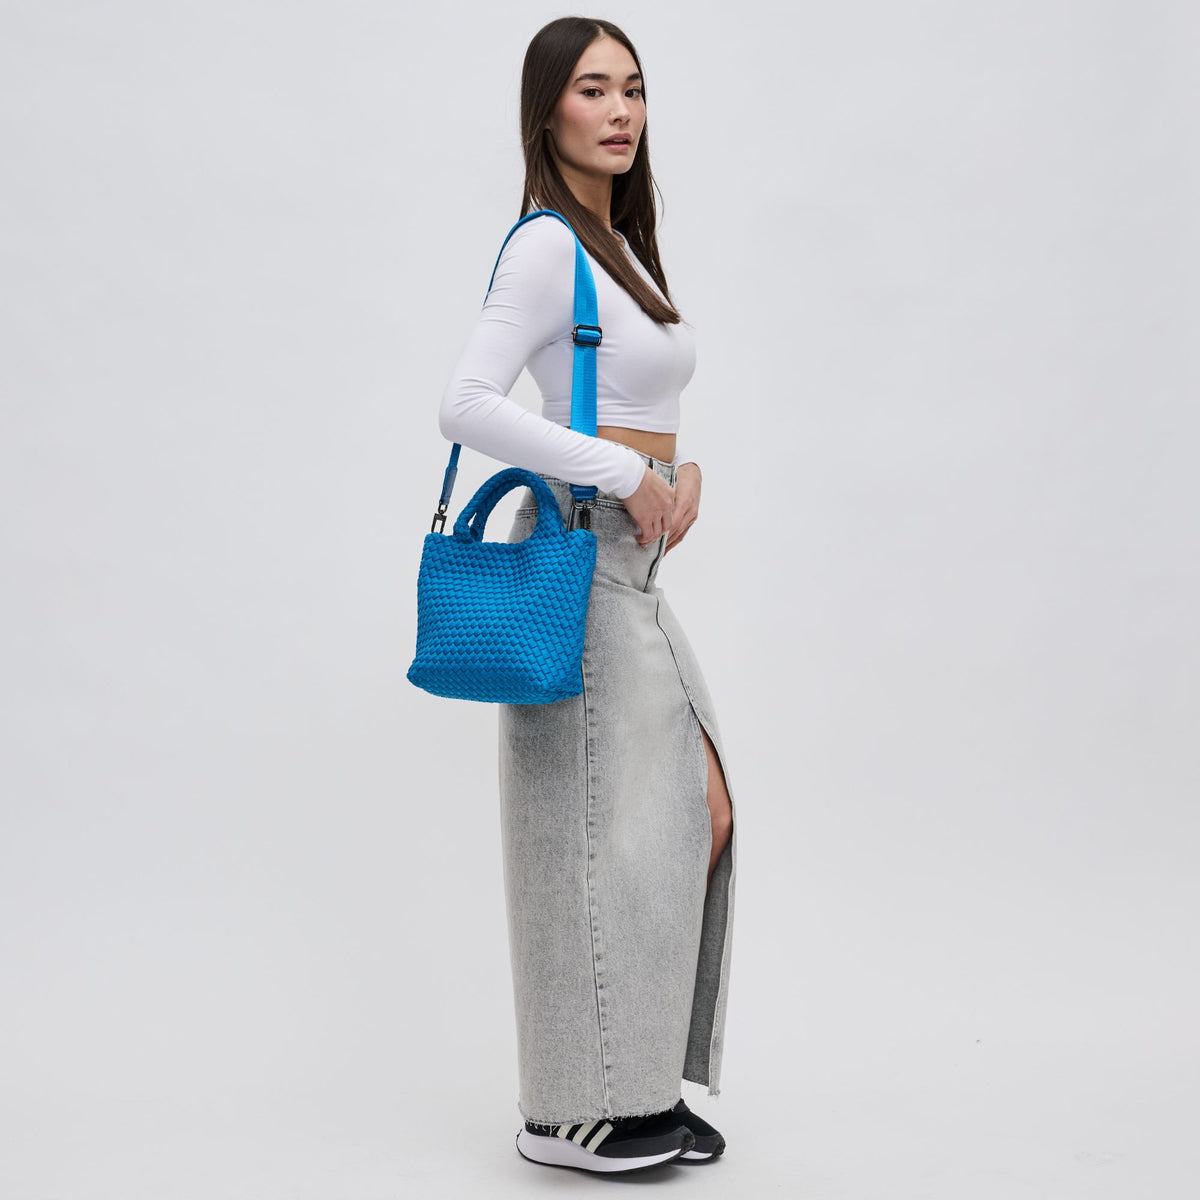 Woman wearing Ocean Sol and Selene Sky's The Limit - Small Crossbody 841764109017 View 2 | Ocean